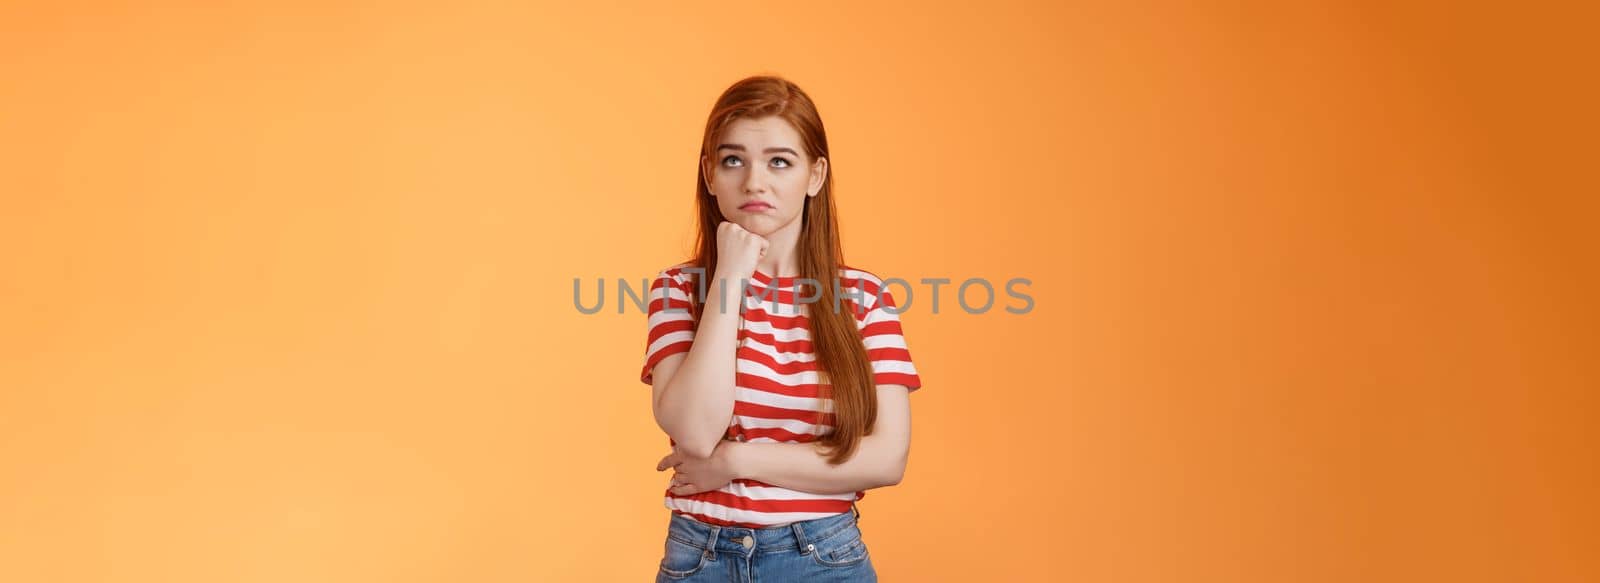 Upset redhead woman losing lottery feel uneasy distressed, look up regret loss, lean on fist pulling sad face, standing lonely unhappy orange background thinking, taking hard decision.